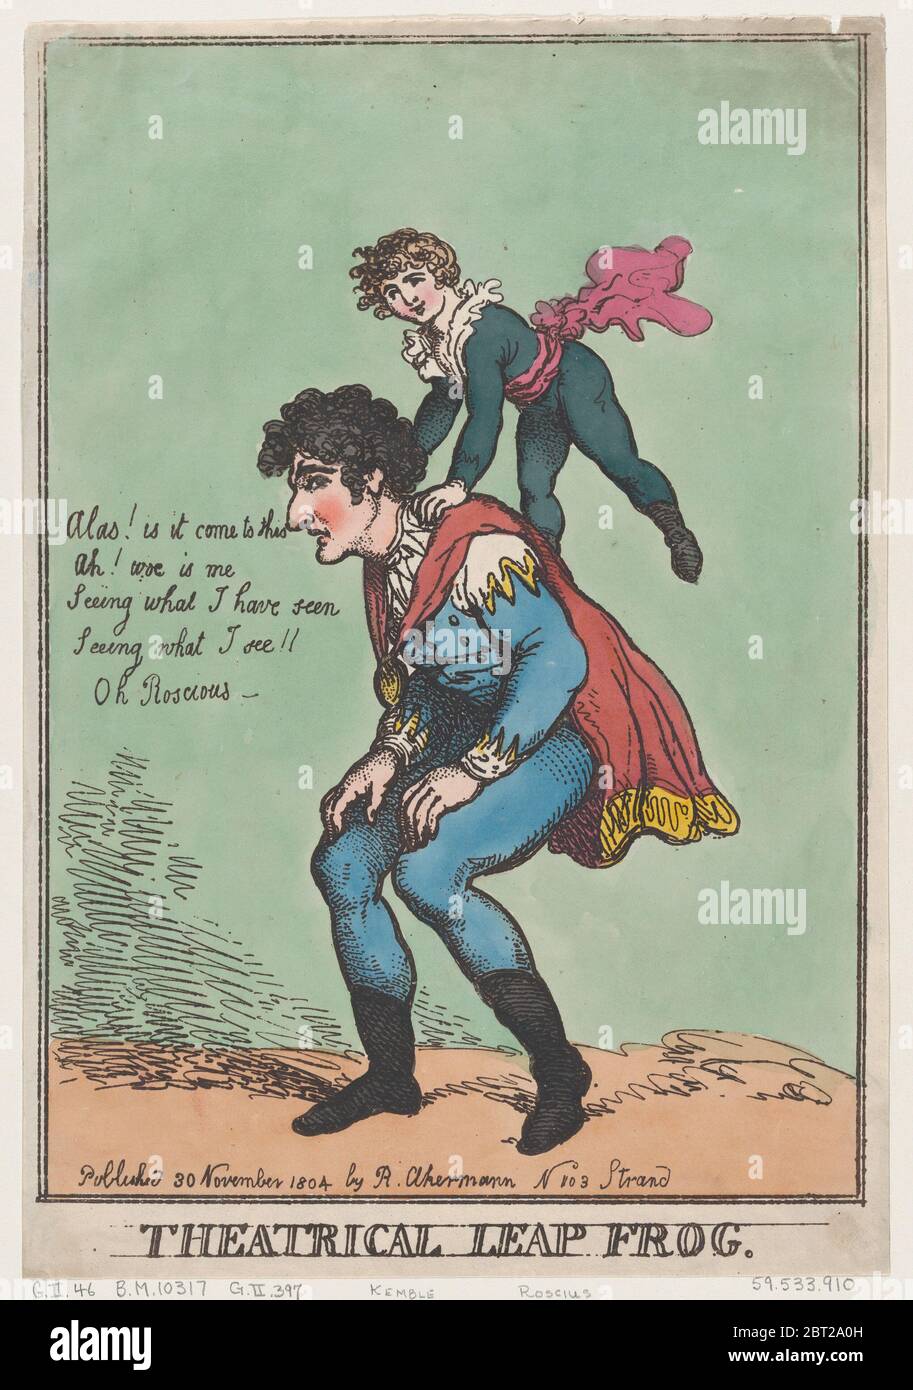 Theatrical Leap Frog, November 30, 1804. Stock Photo